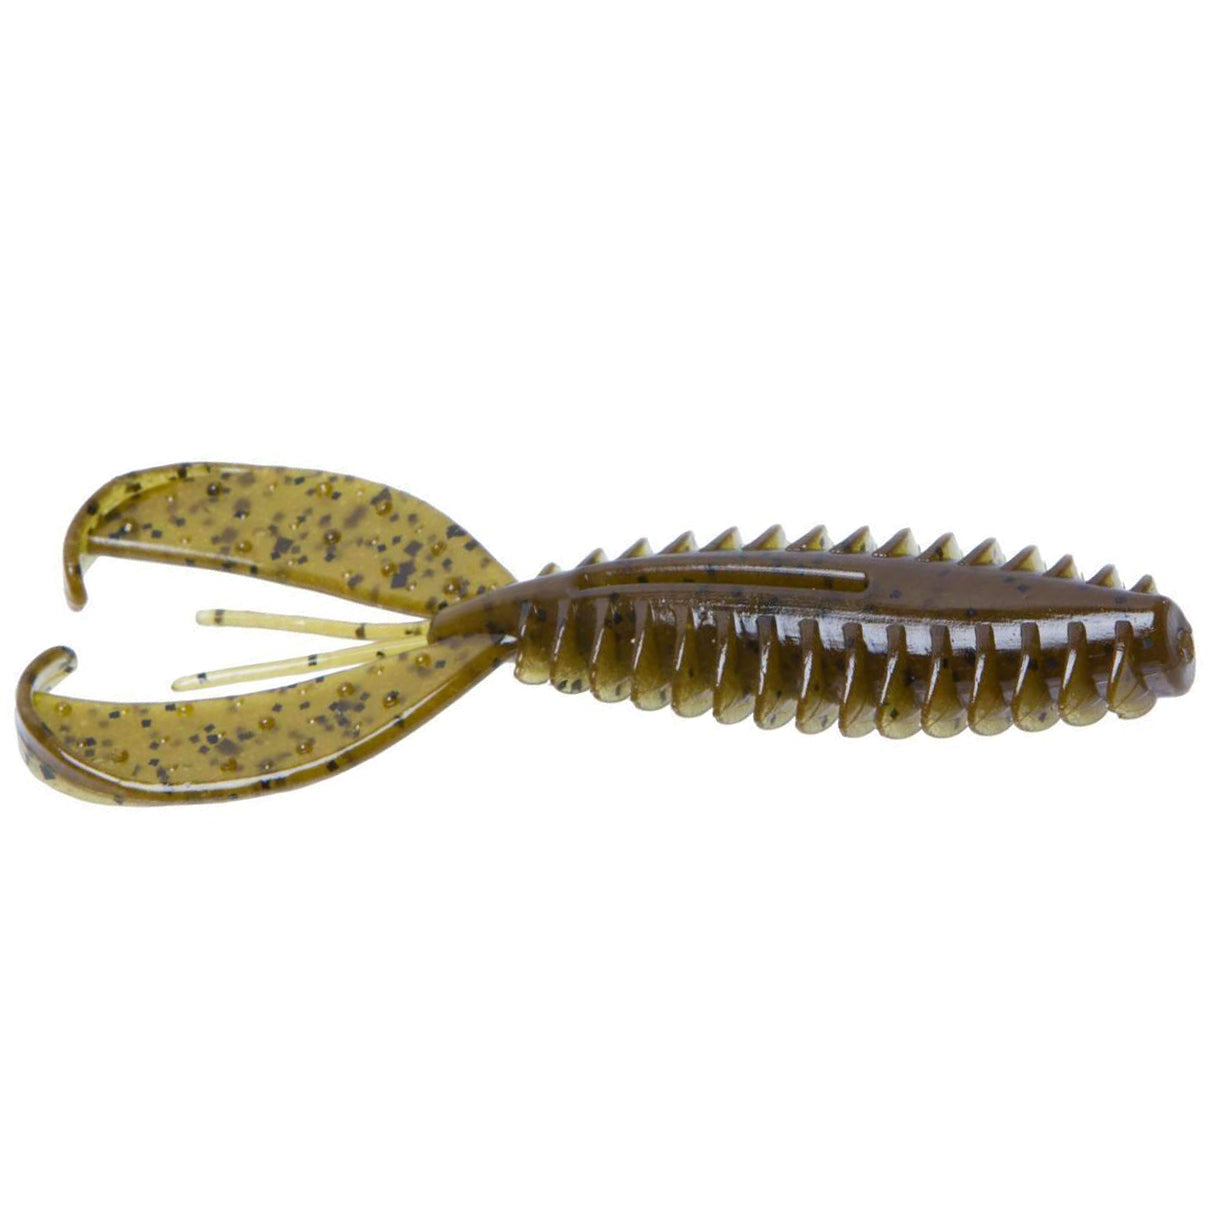 Zoom Z-Craw Review 